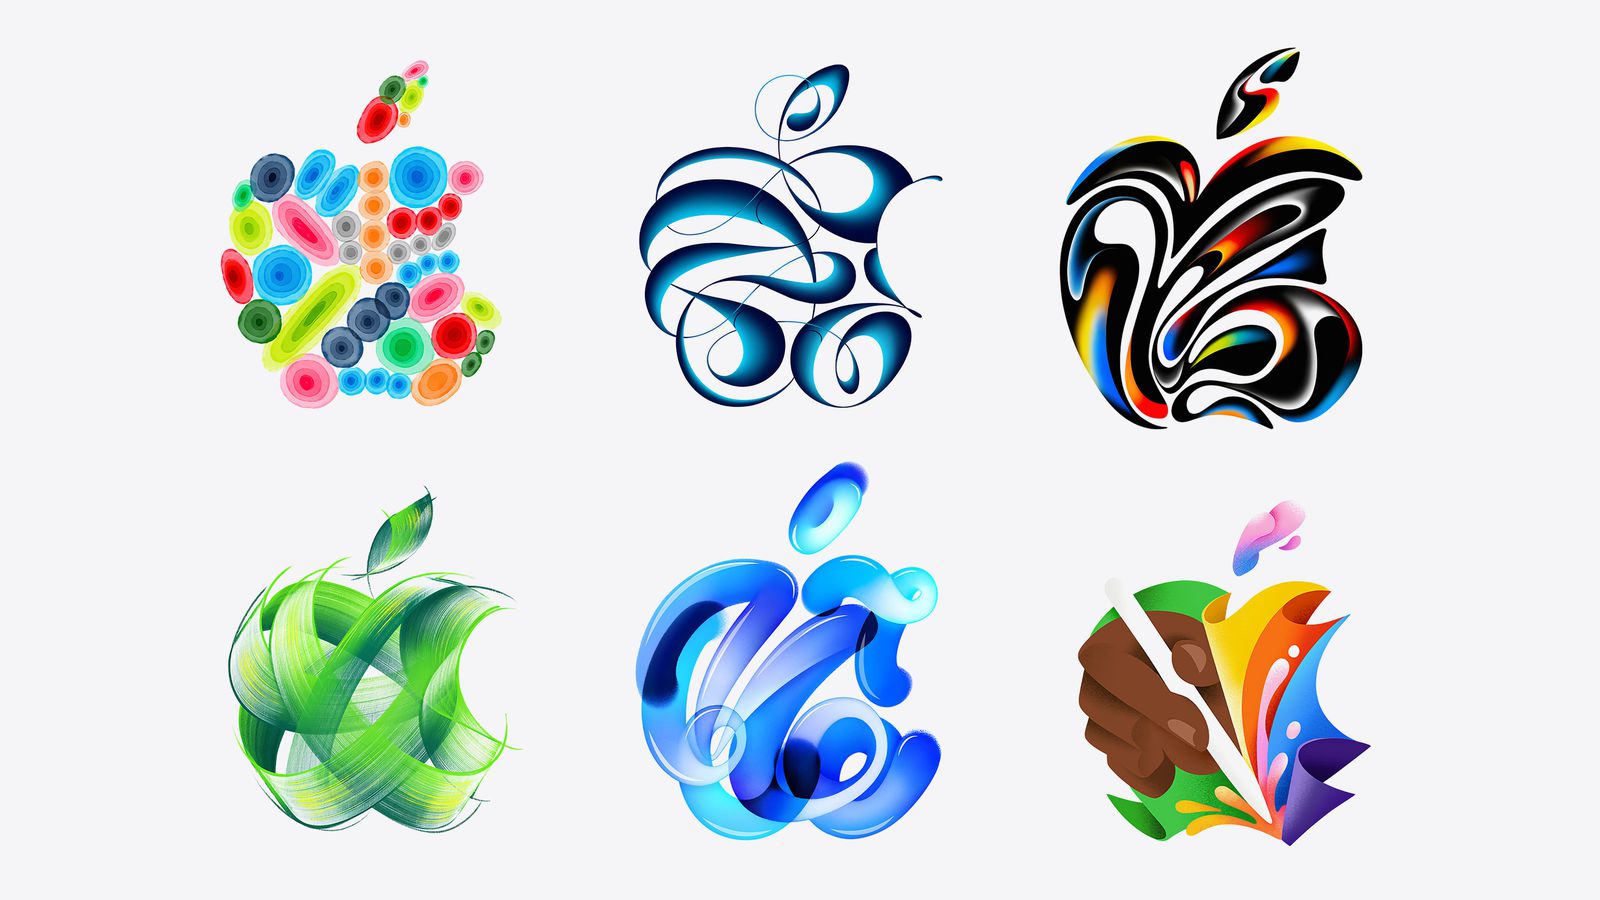 From iPhoneIslam.com, six abstract designs in bright colors and flowing shapes, including a collection of spheres, ribbon-like shapes and leaf motifs influenced by fringe news.